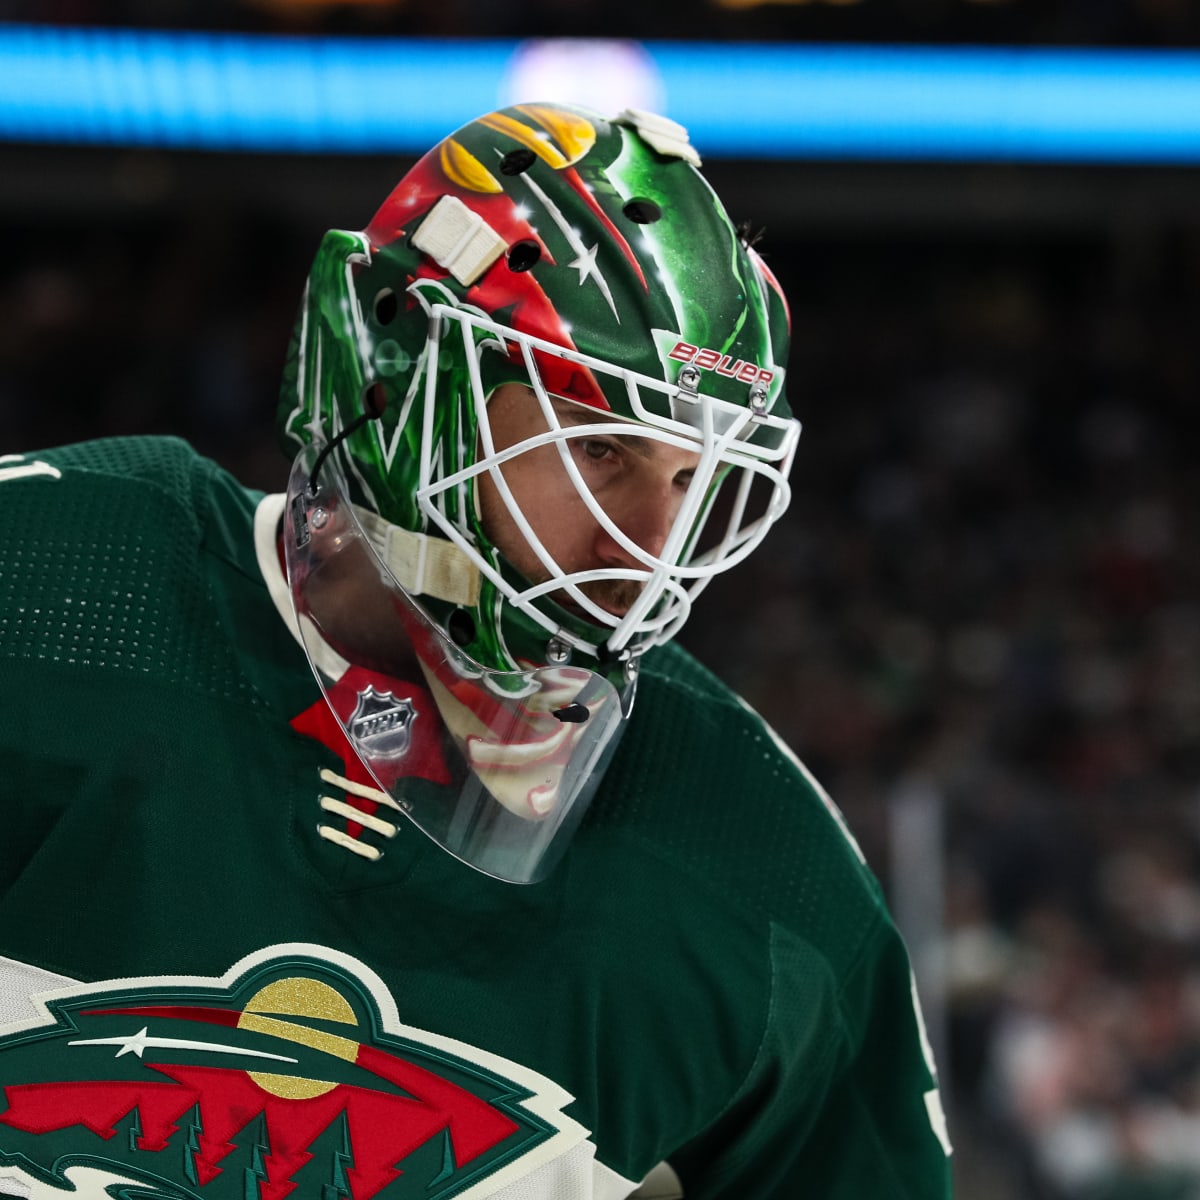 Report: Talbot unhappy with Wild after Fleury deal